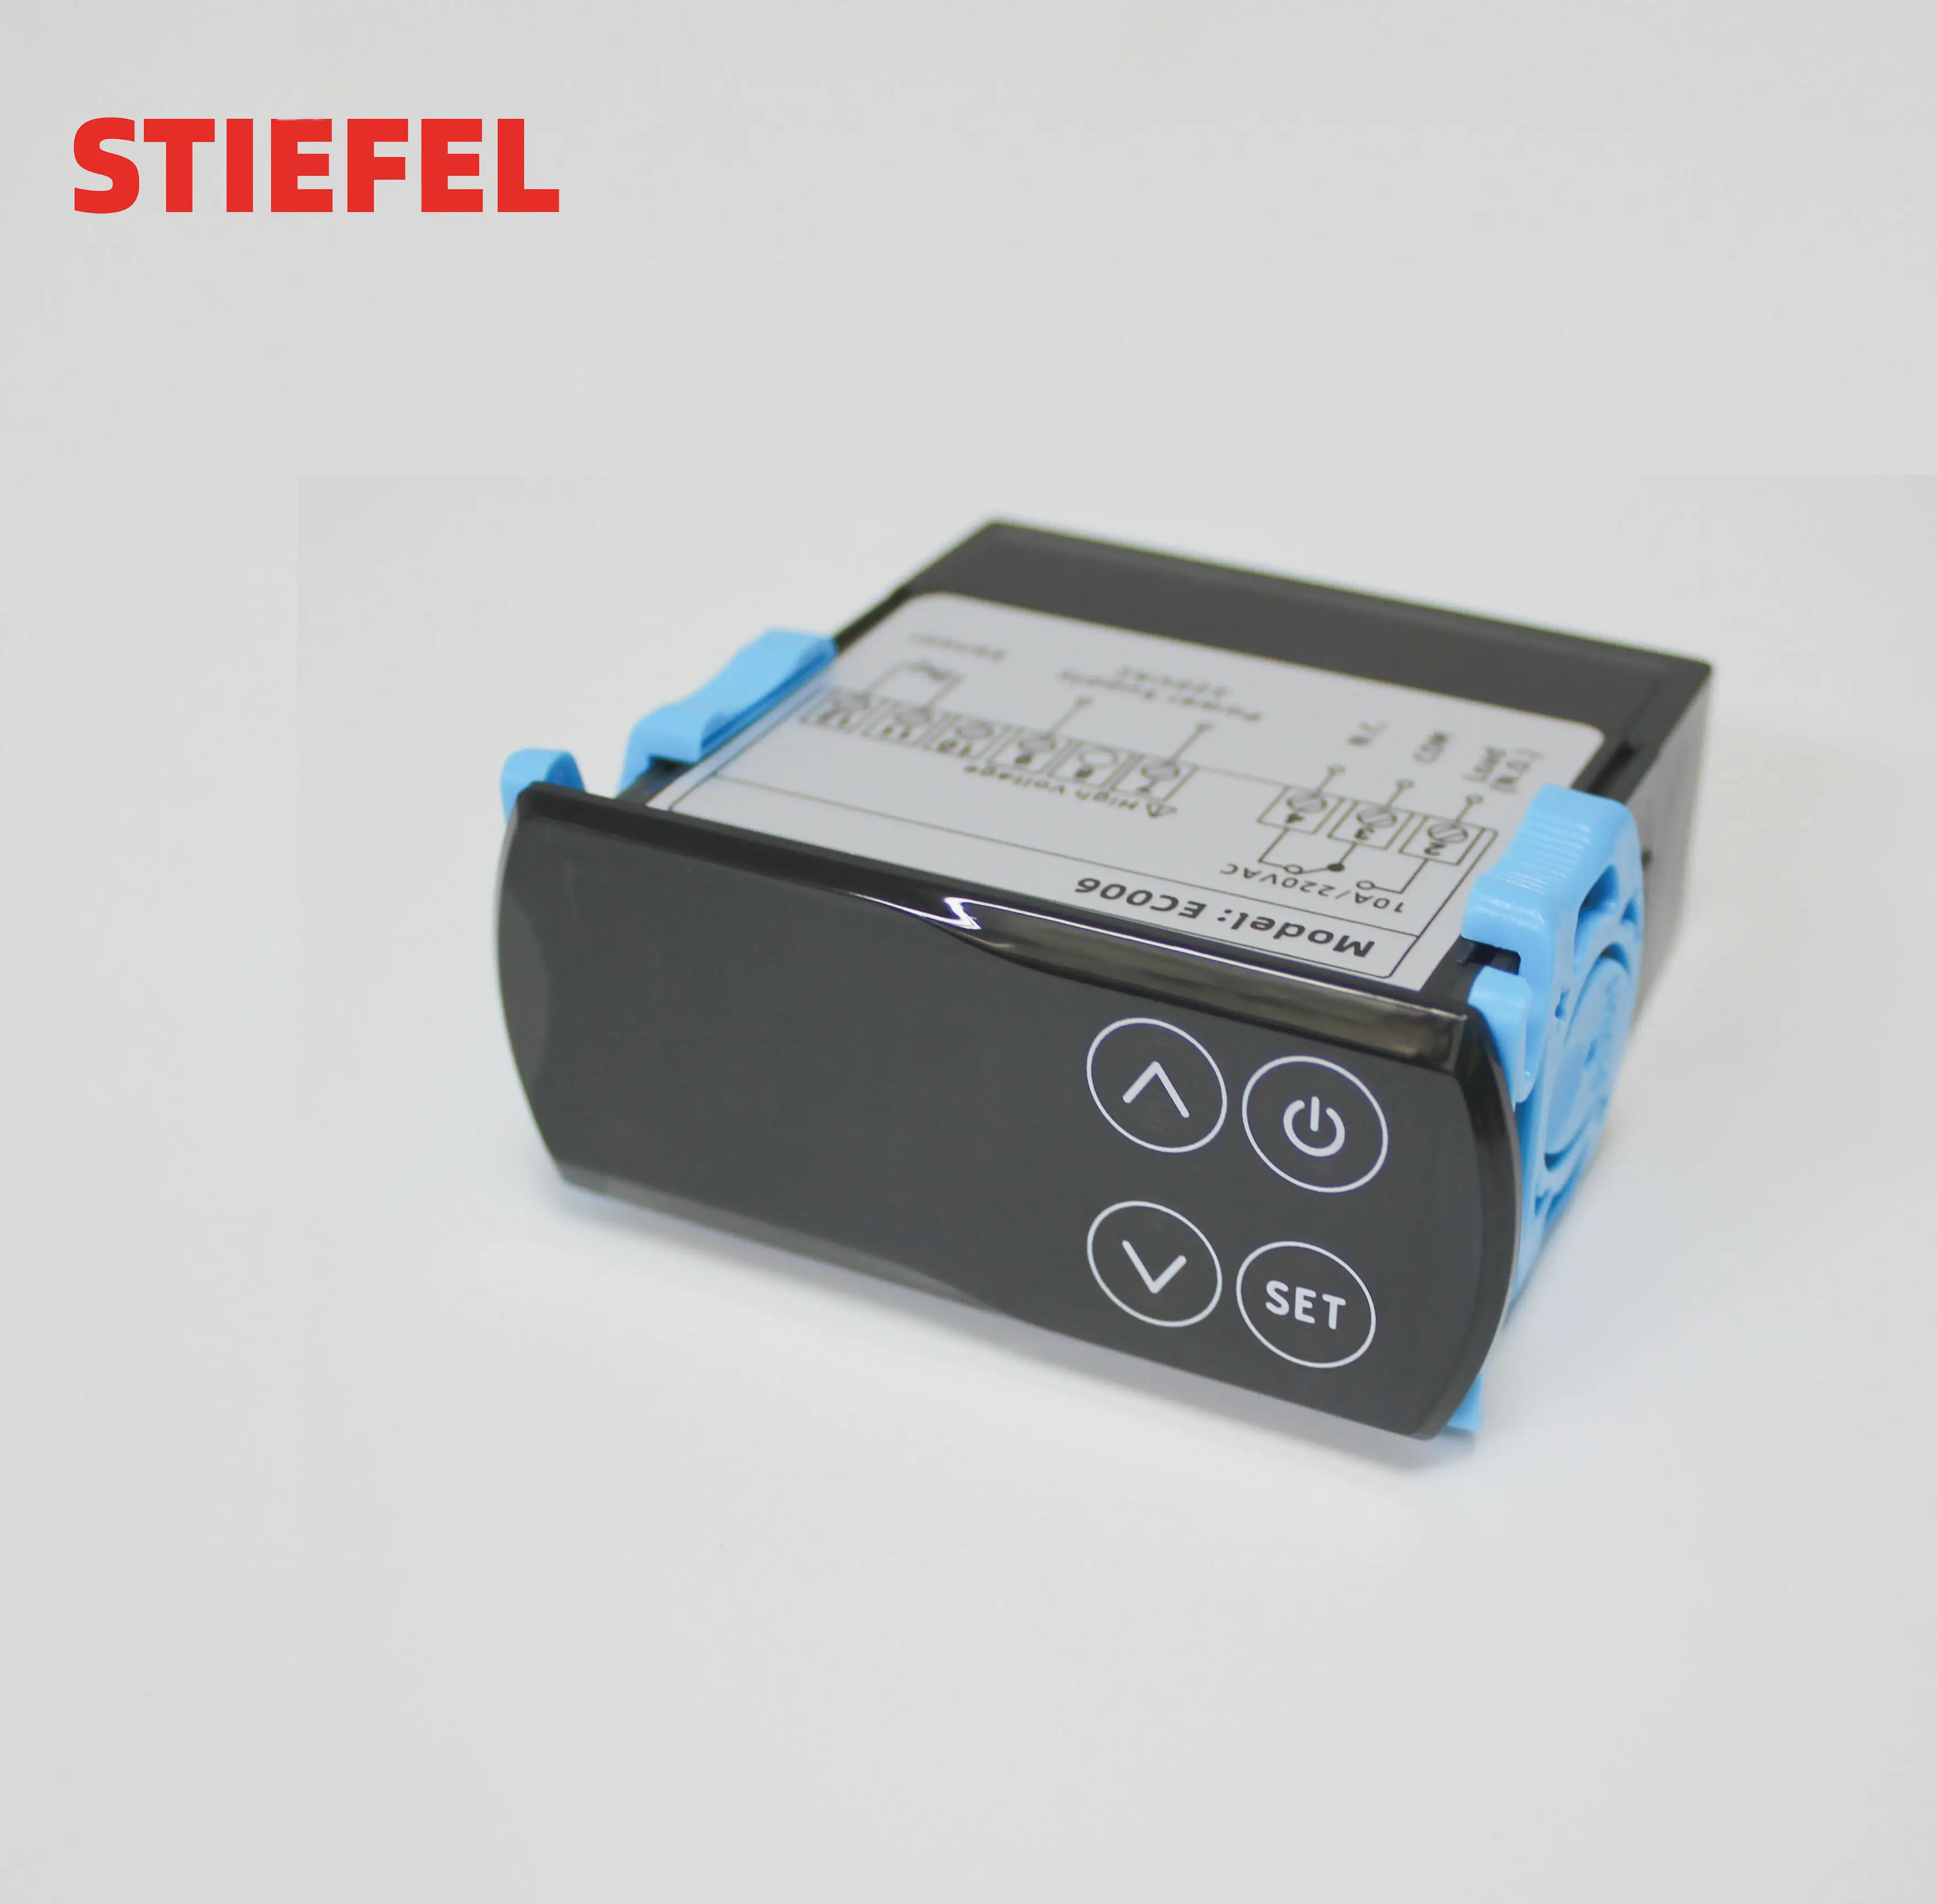 STIEFEL electronic temperature controller 220V digital touch screen heating and cooling temperature controller